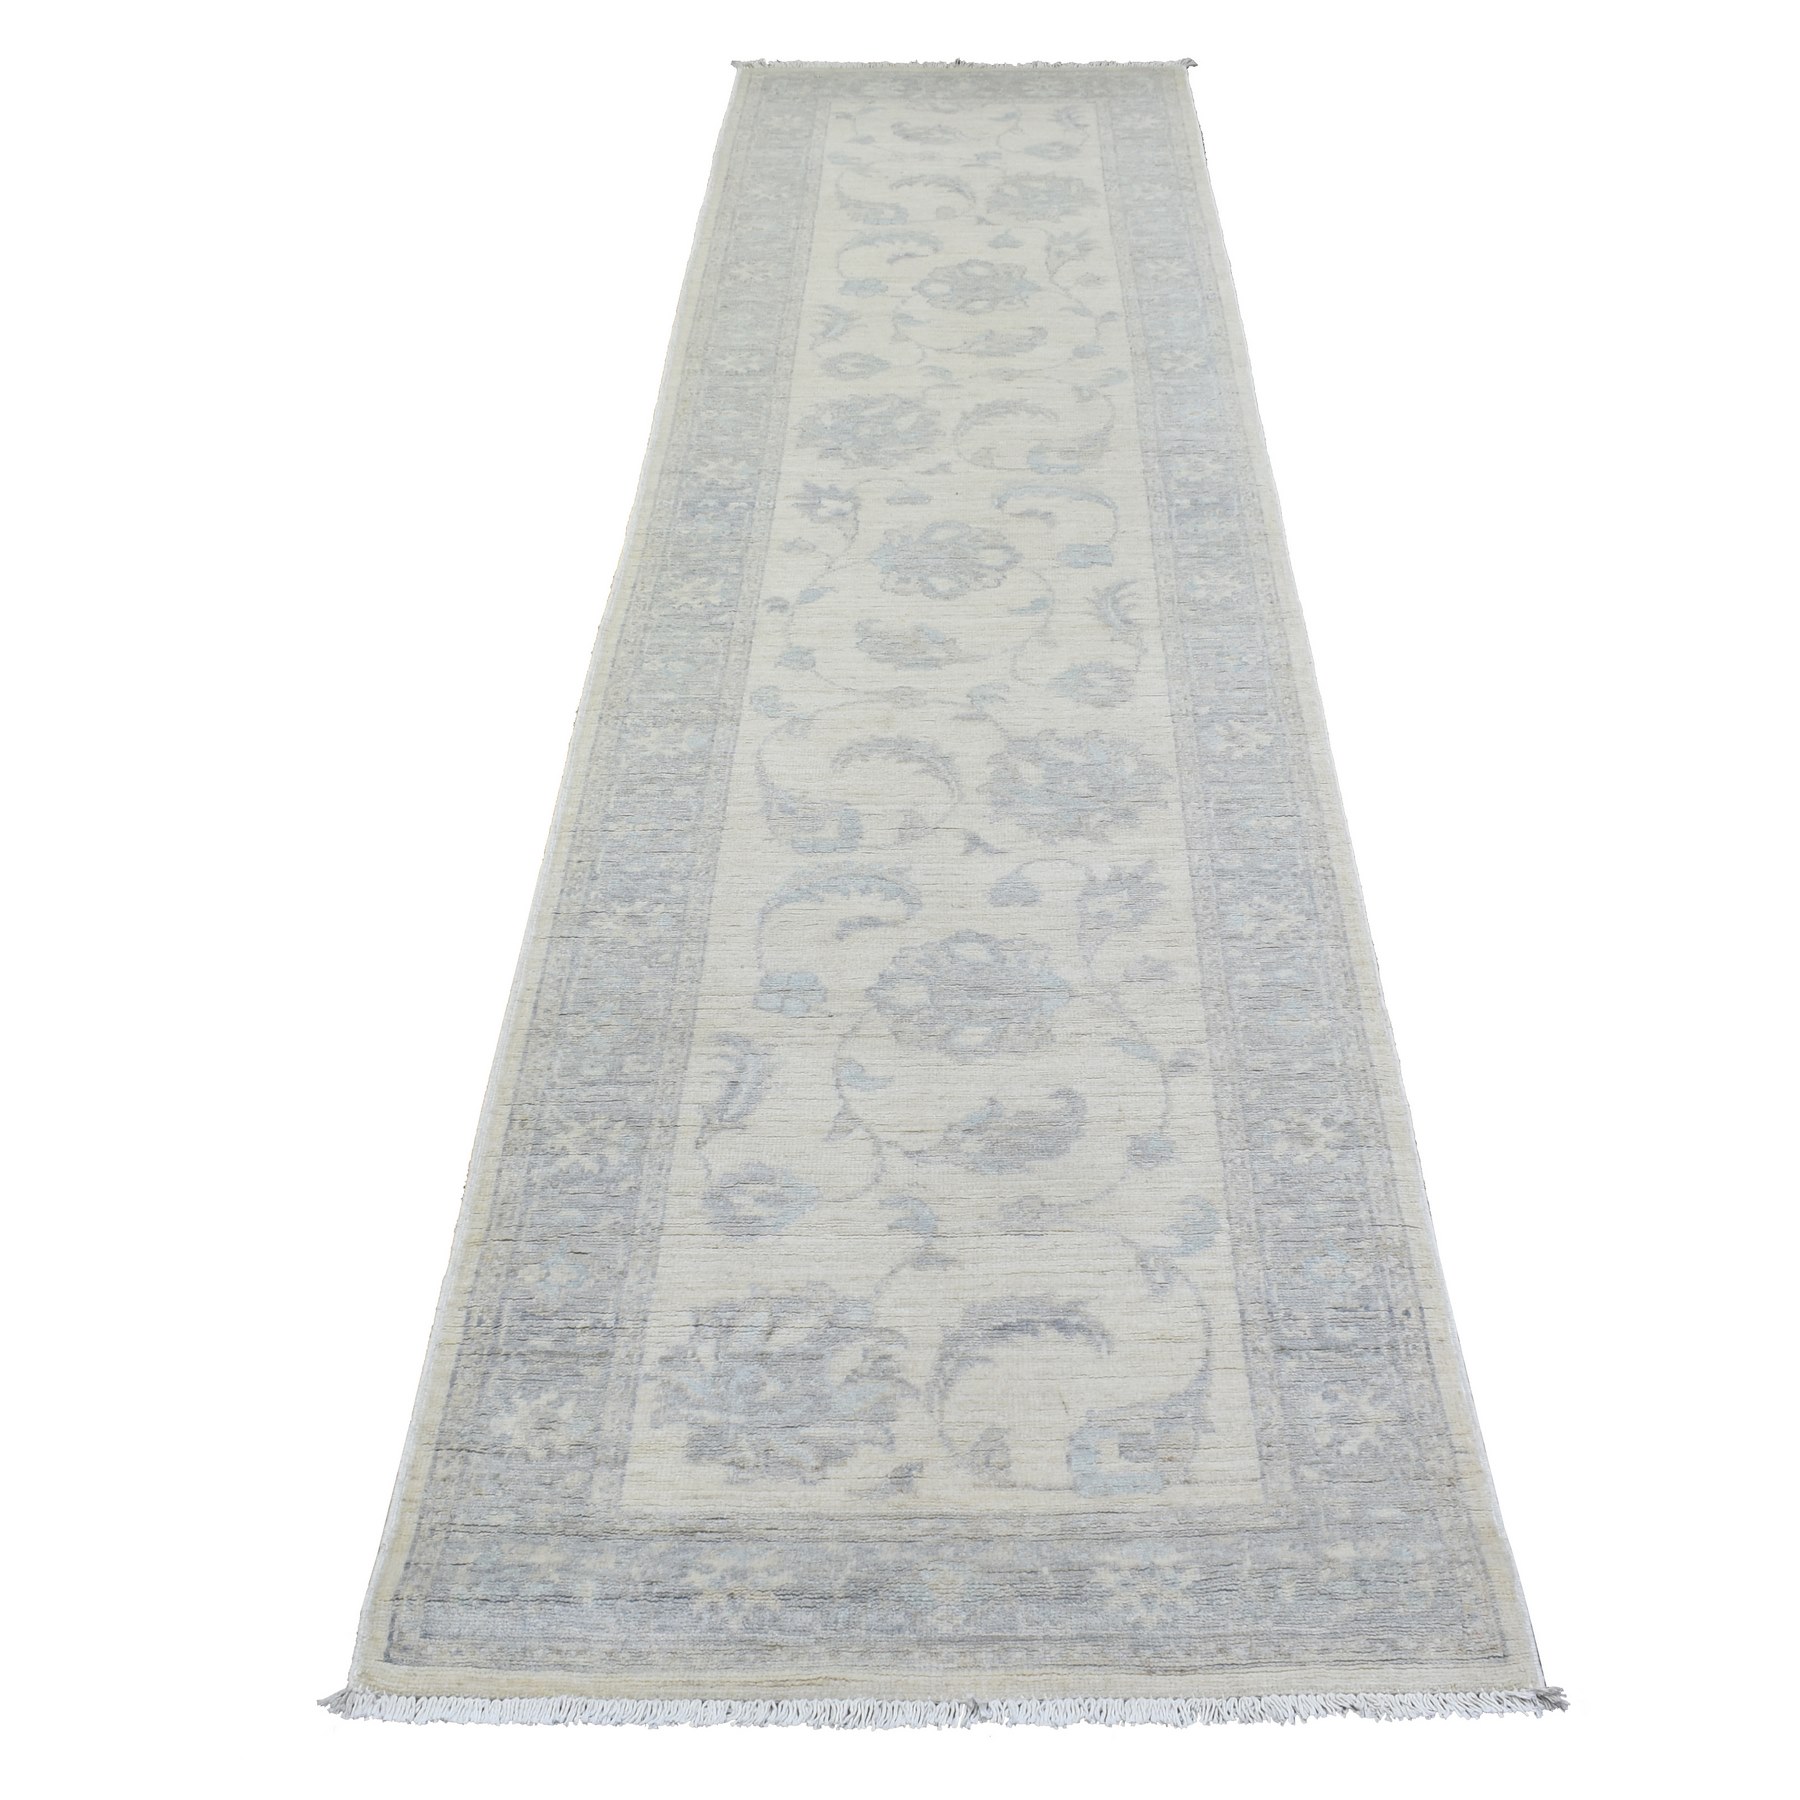 2'7"x9'9" White Wash Peshawar with All Over Leaf Design, Natural Dyes Soft Wool Hand Woven, Runner Oriental Rug 